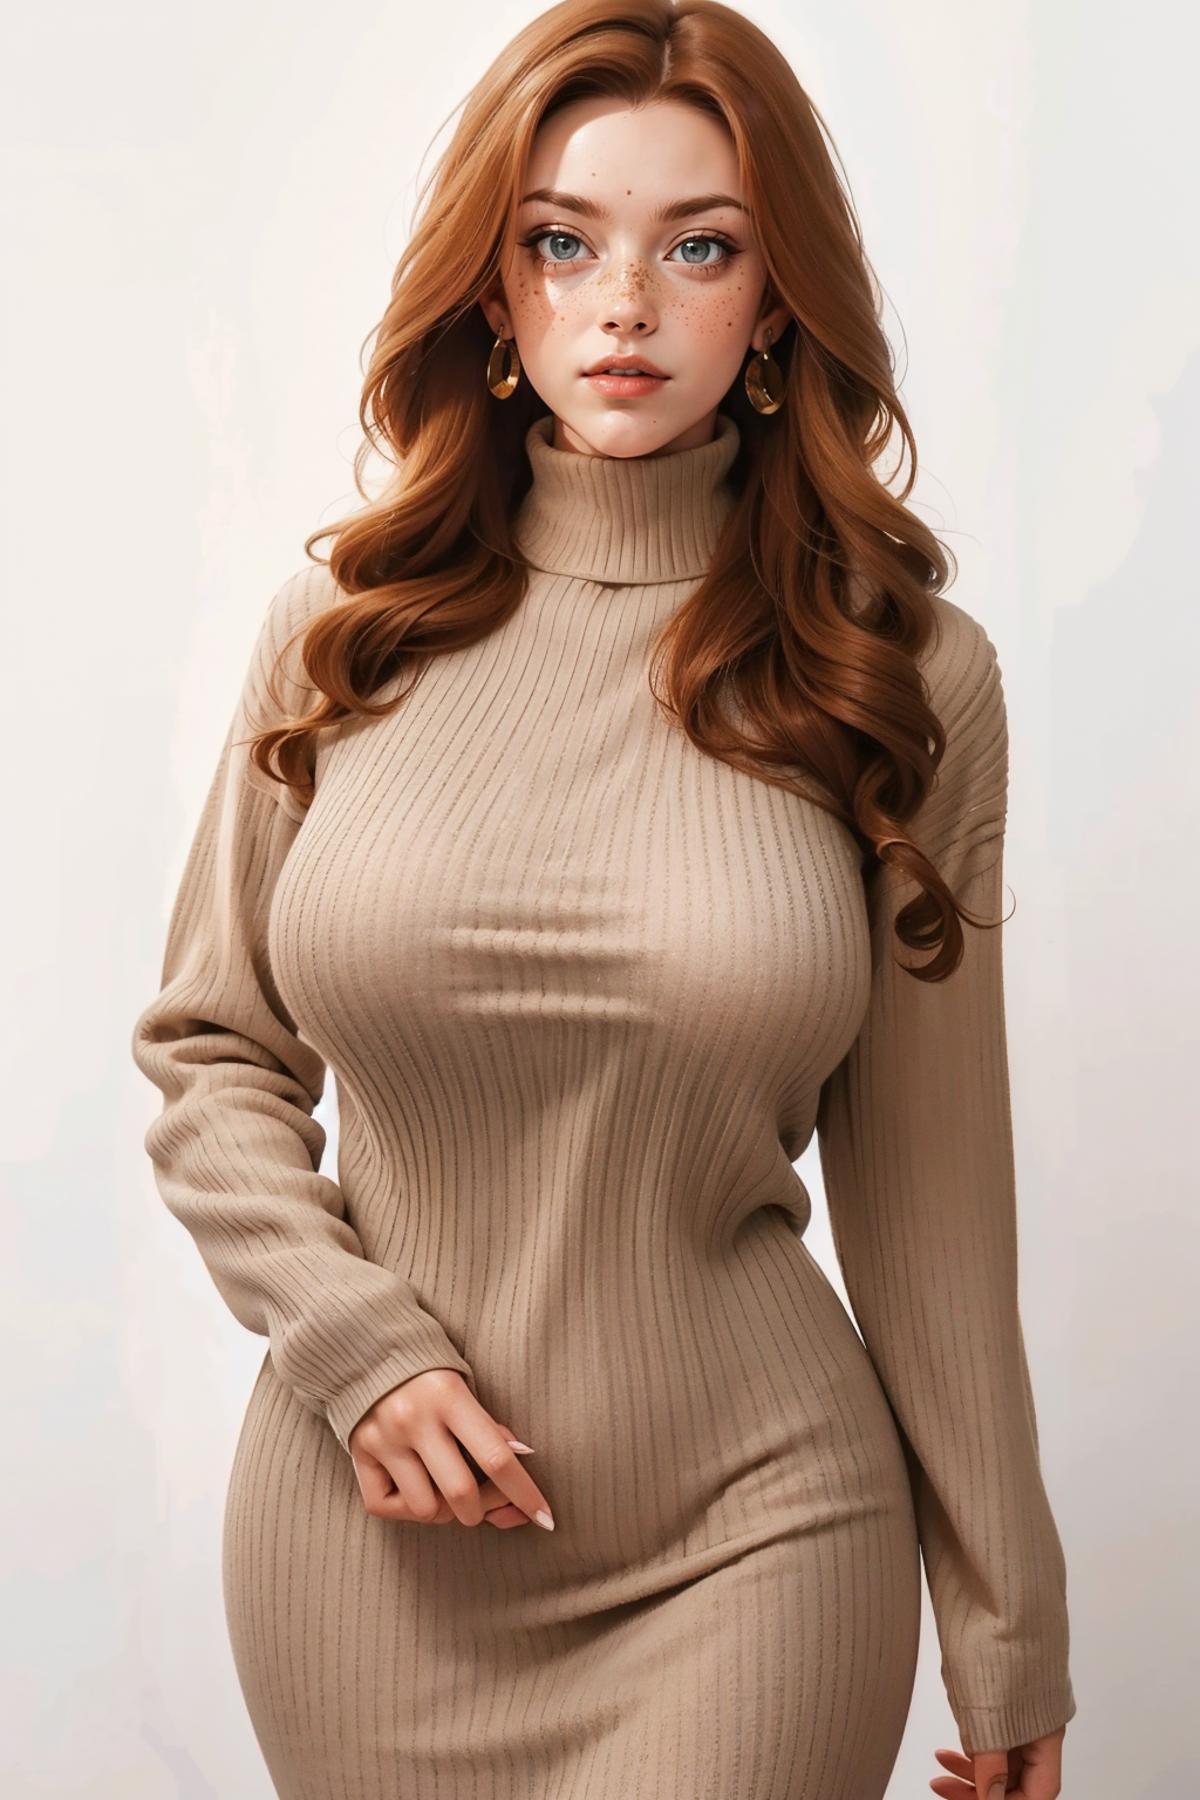 Sweater Dress image by freckledvixon